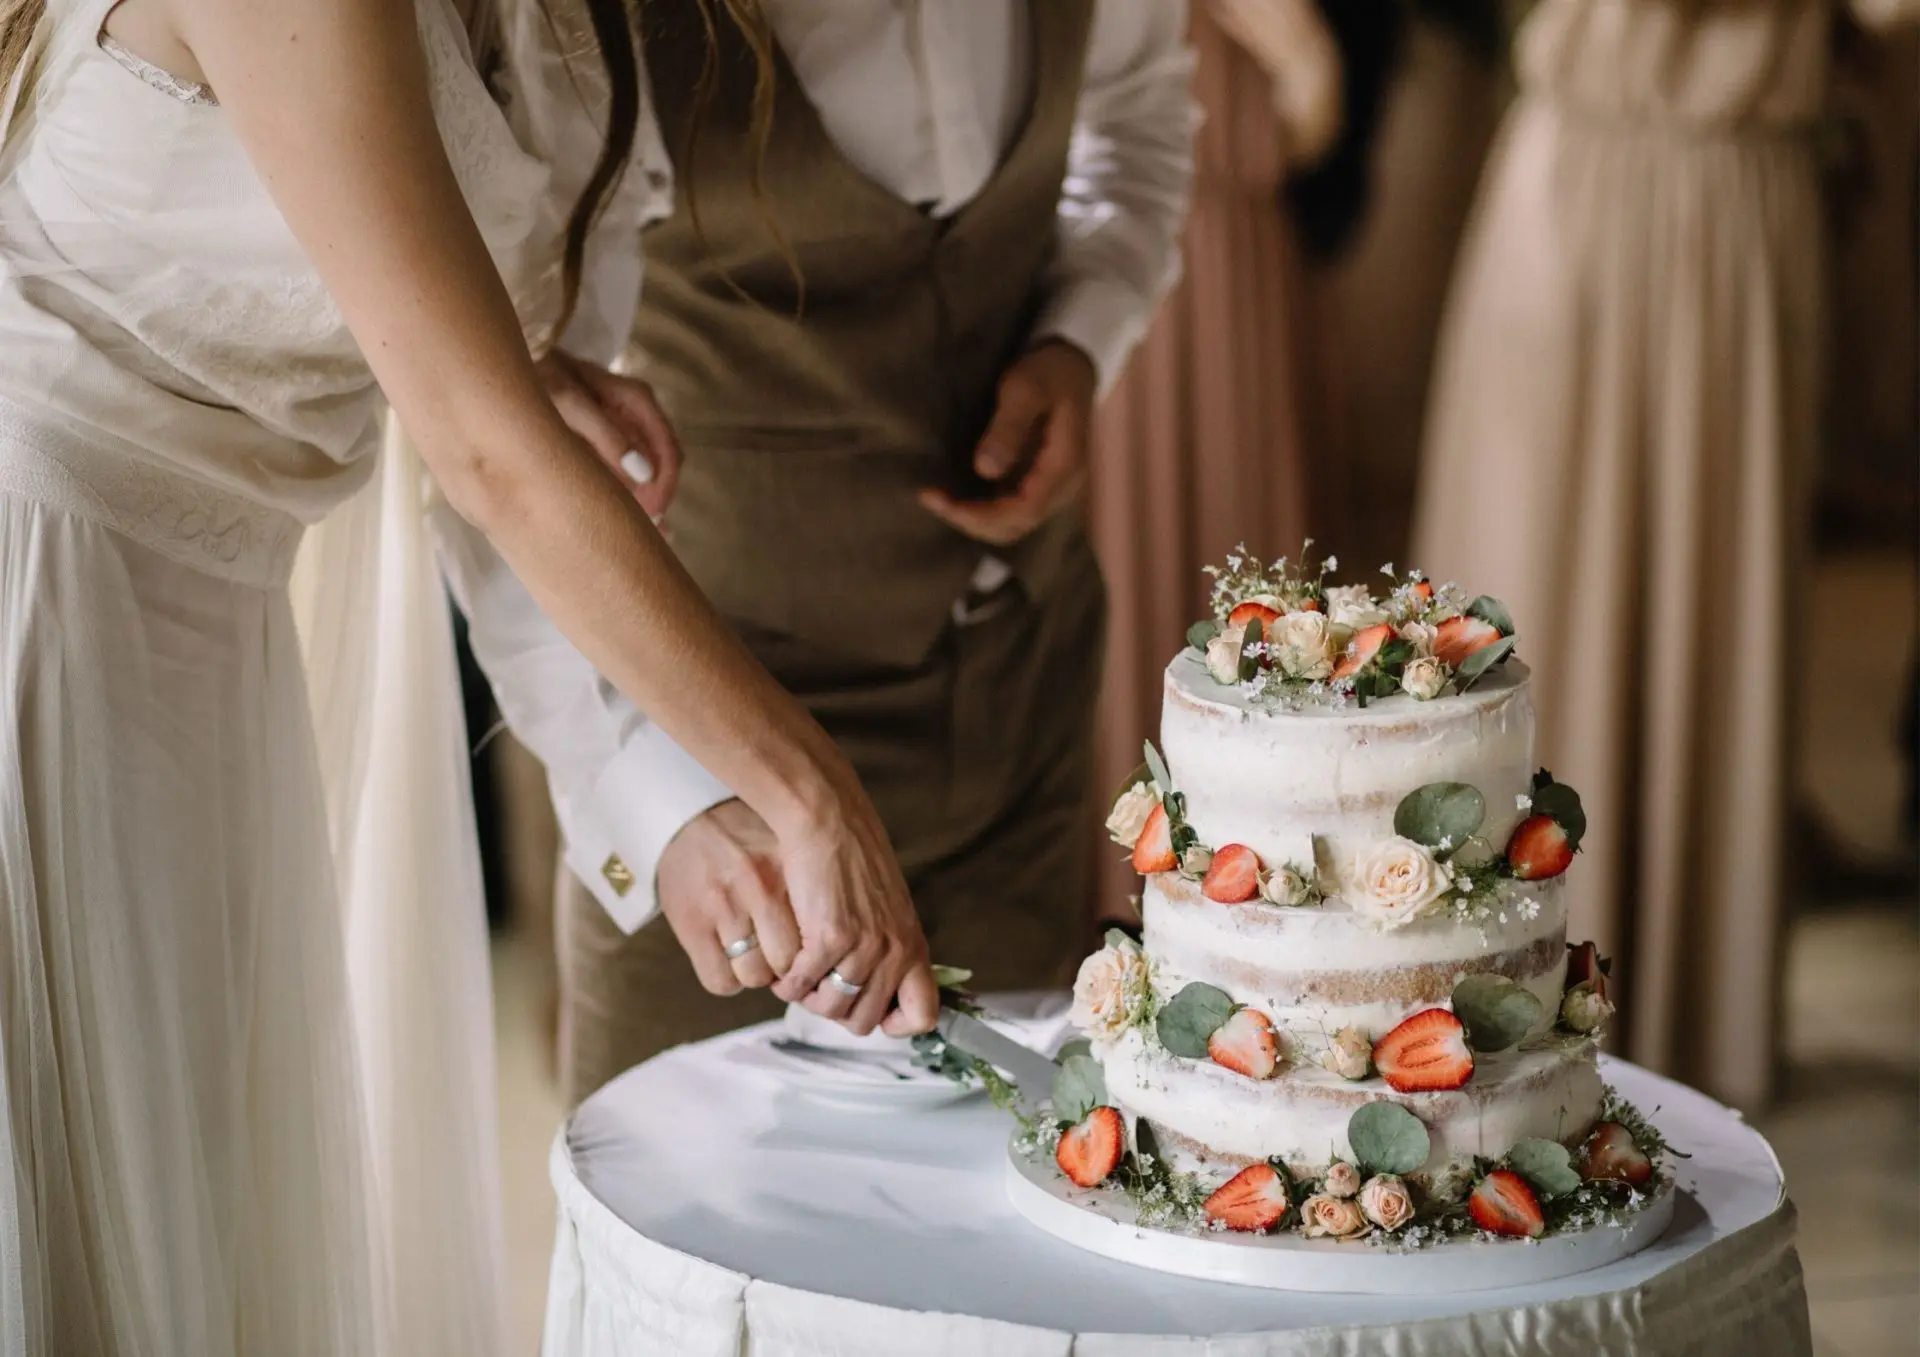 timeless wedding trends of classical style cake